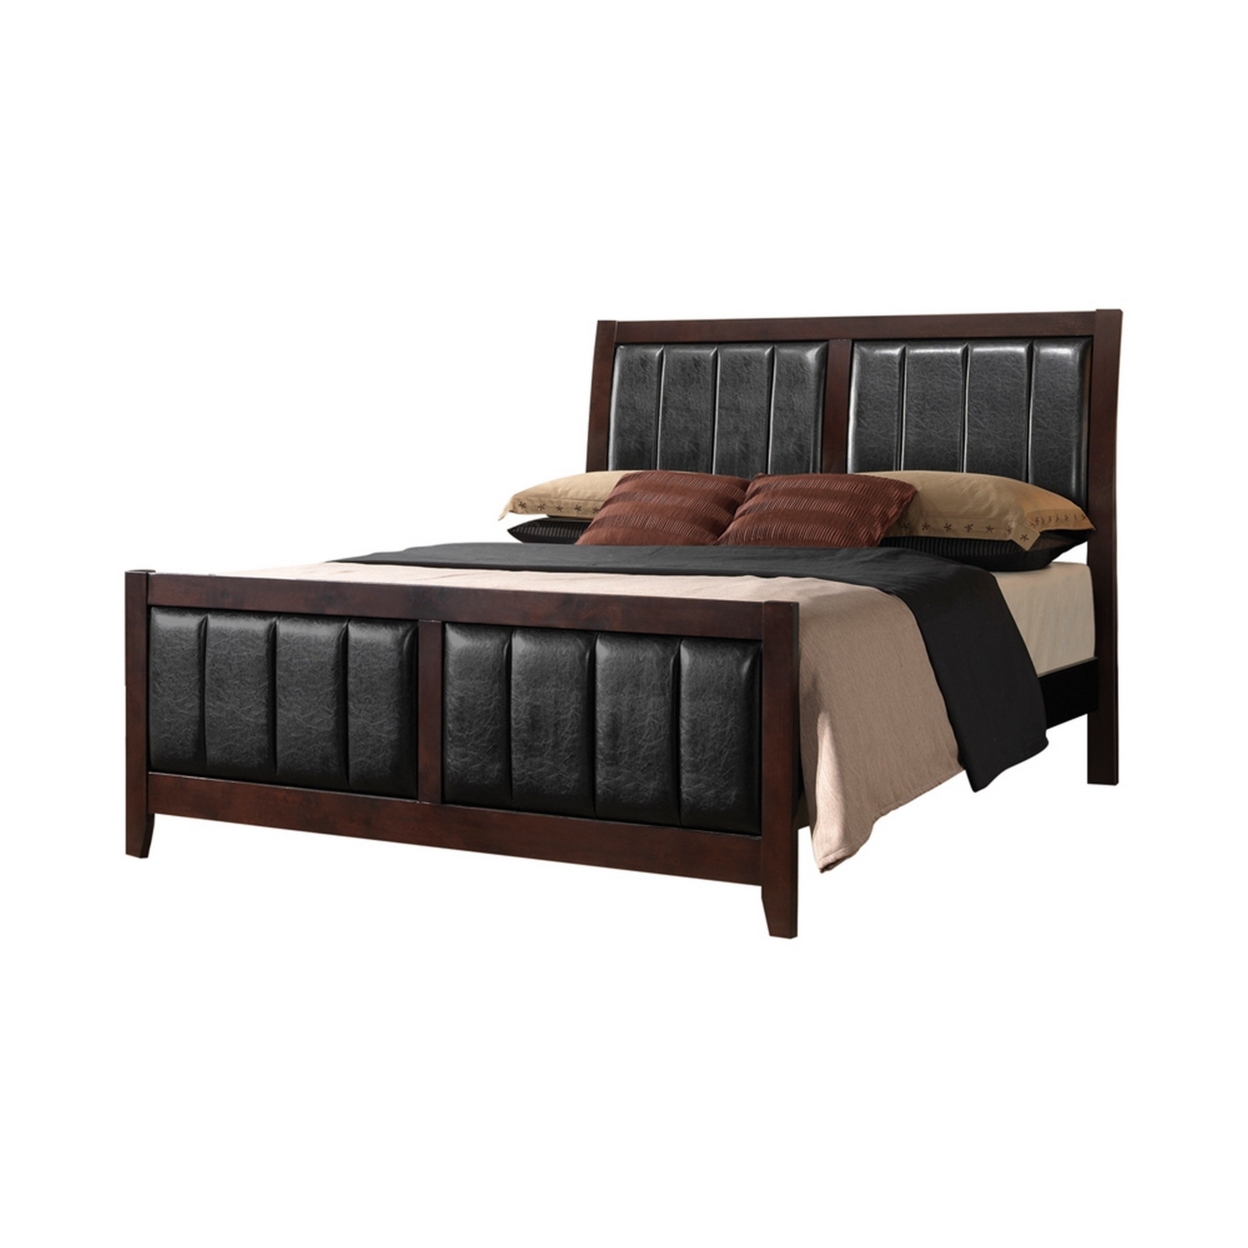 Leatherette Padded Queen Size Bed With Vertical Channels, Brown- Saltoro Sherpi